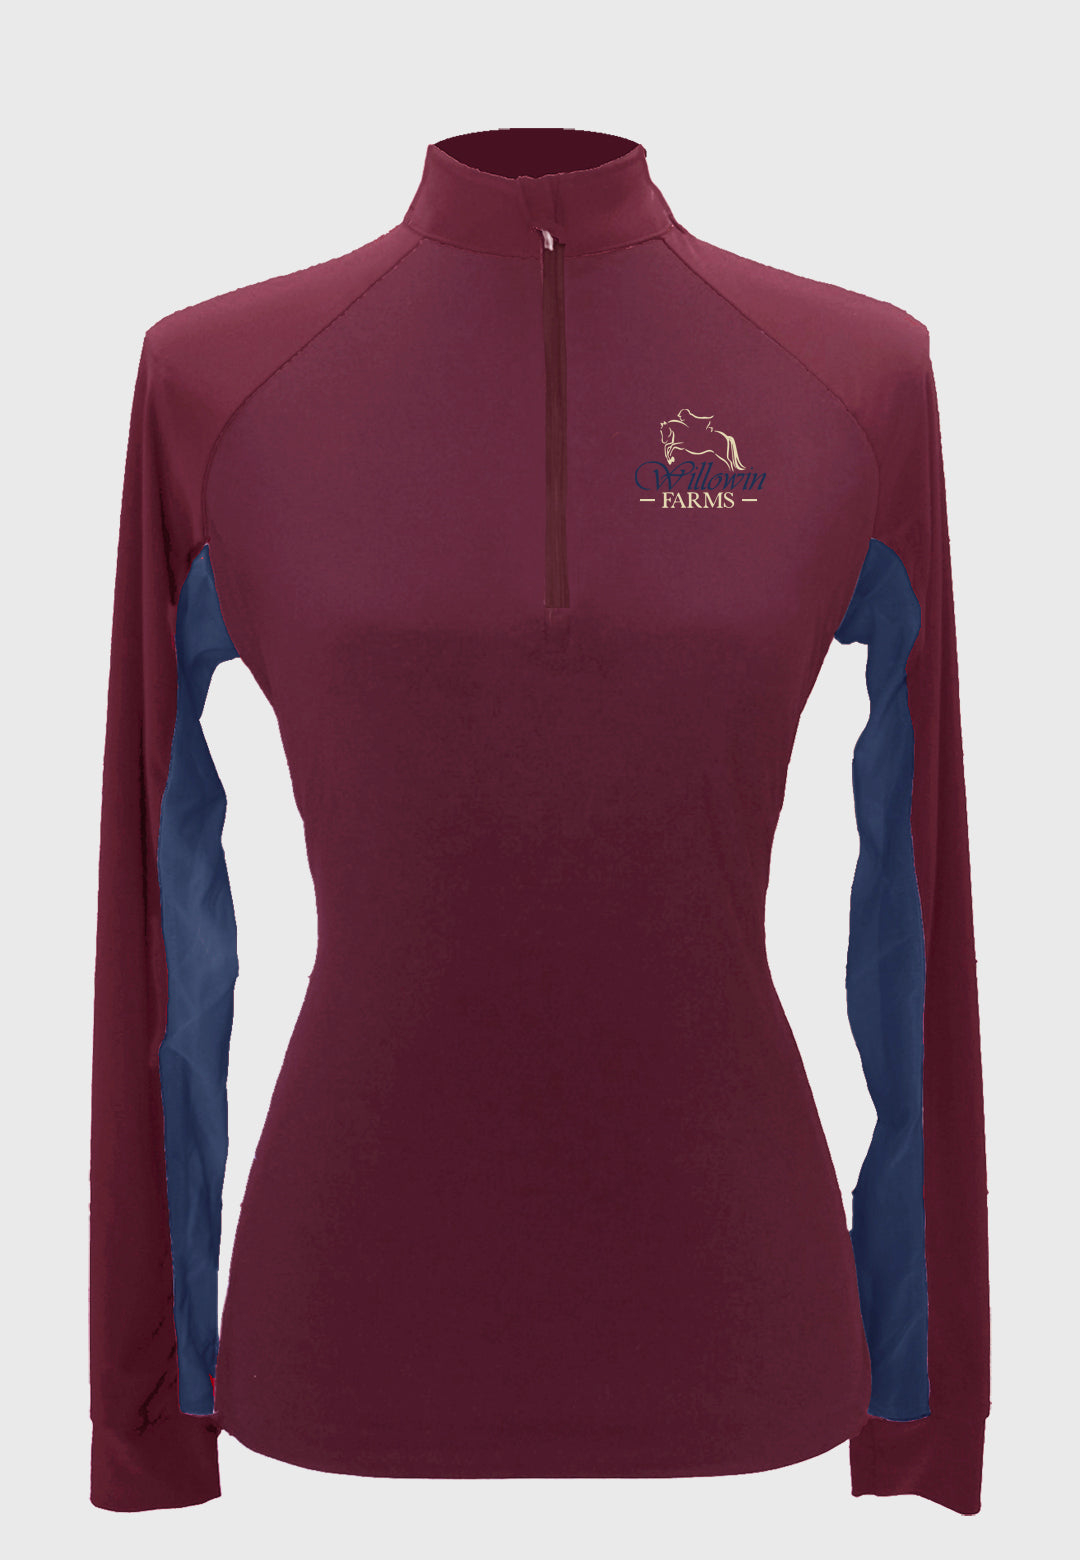 Willowin Farms Custom Sun Shirt - Maroon With Navy Vents    Adult + Youth Sizes